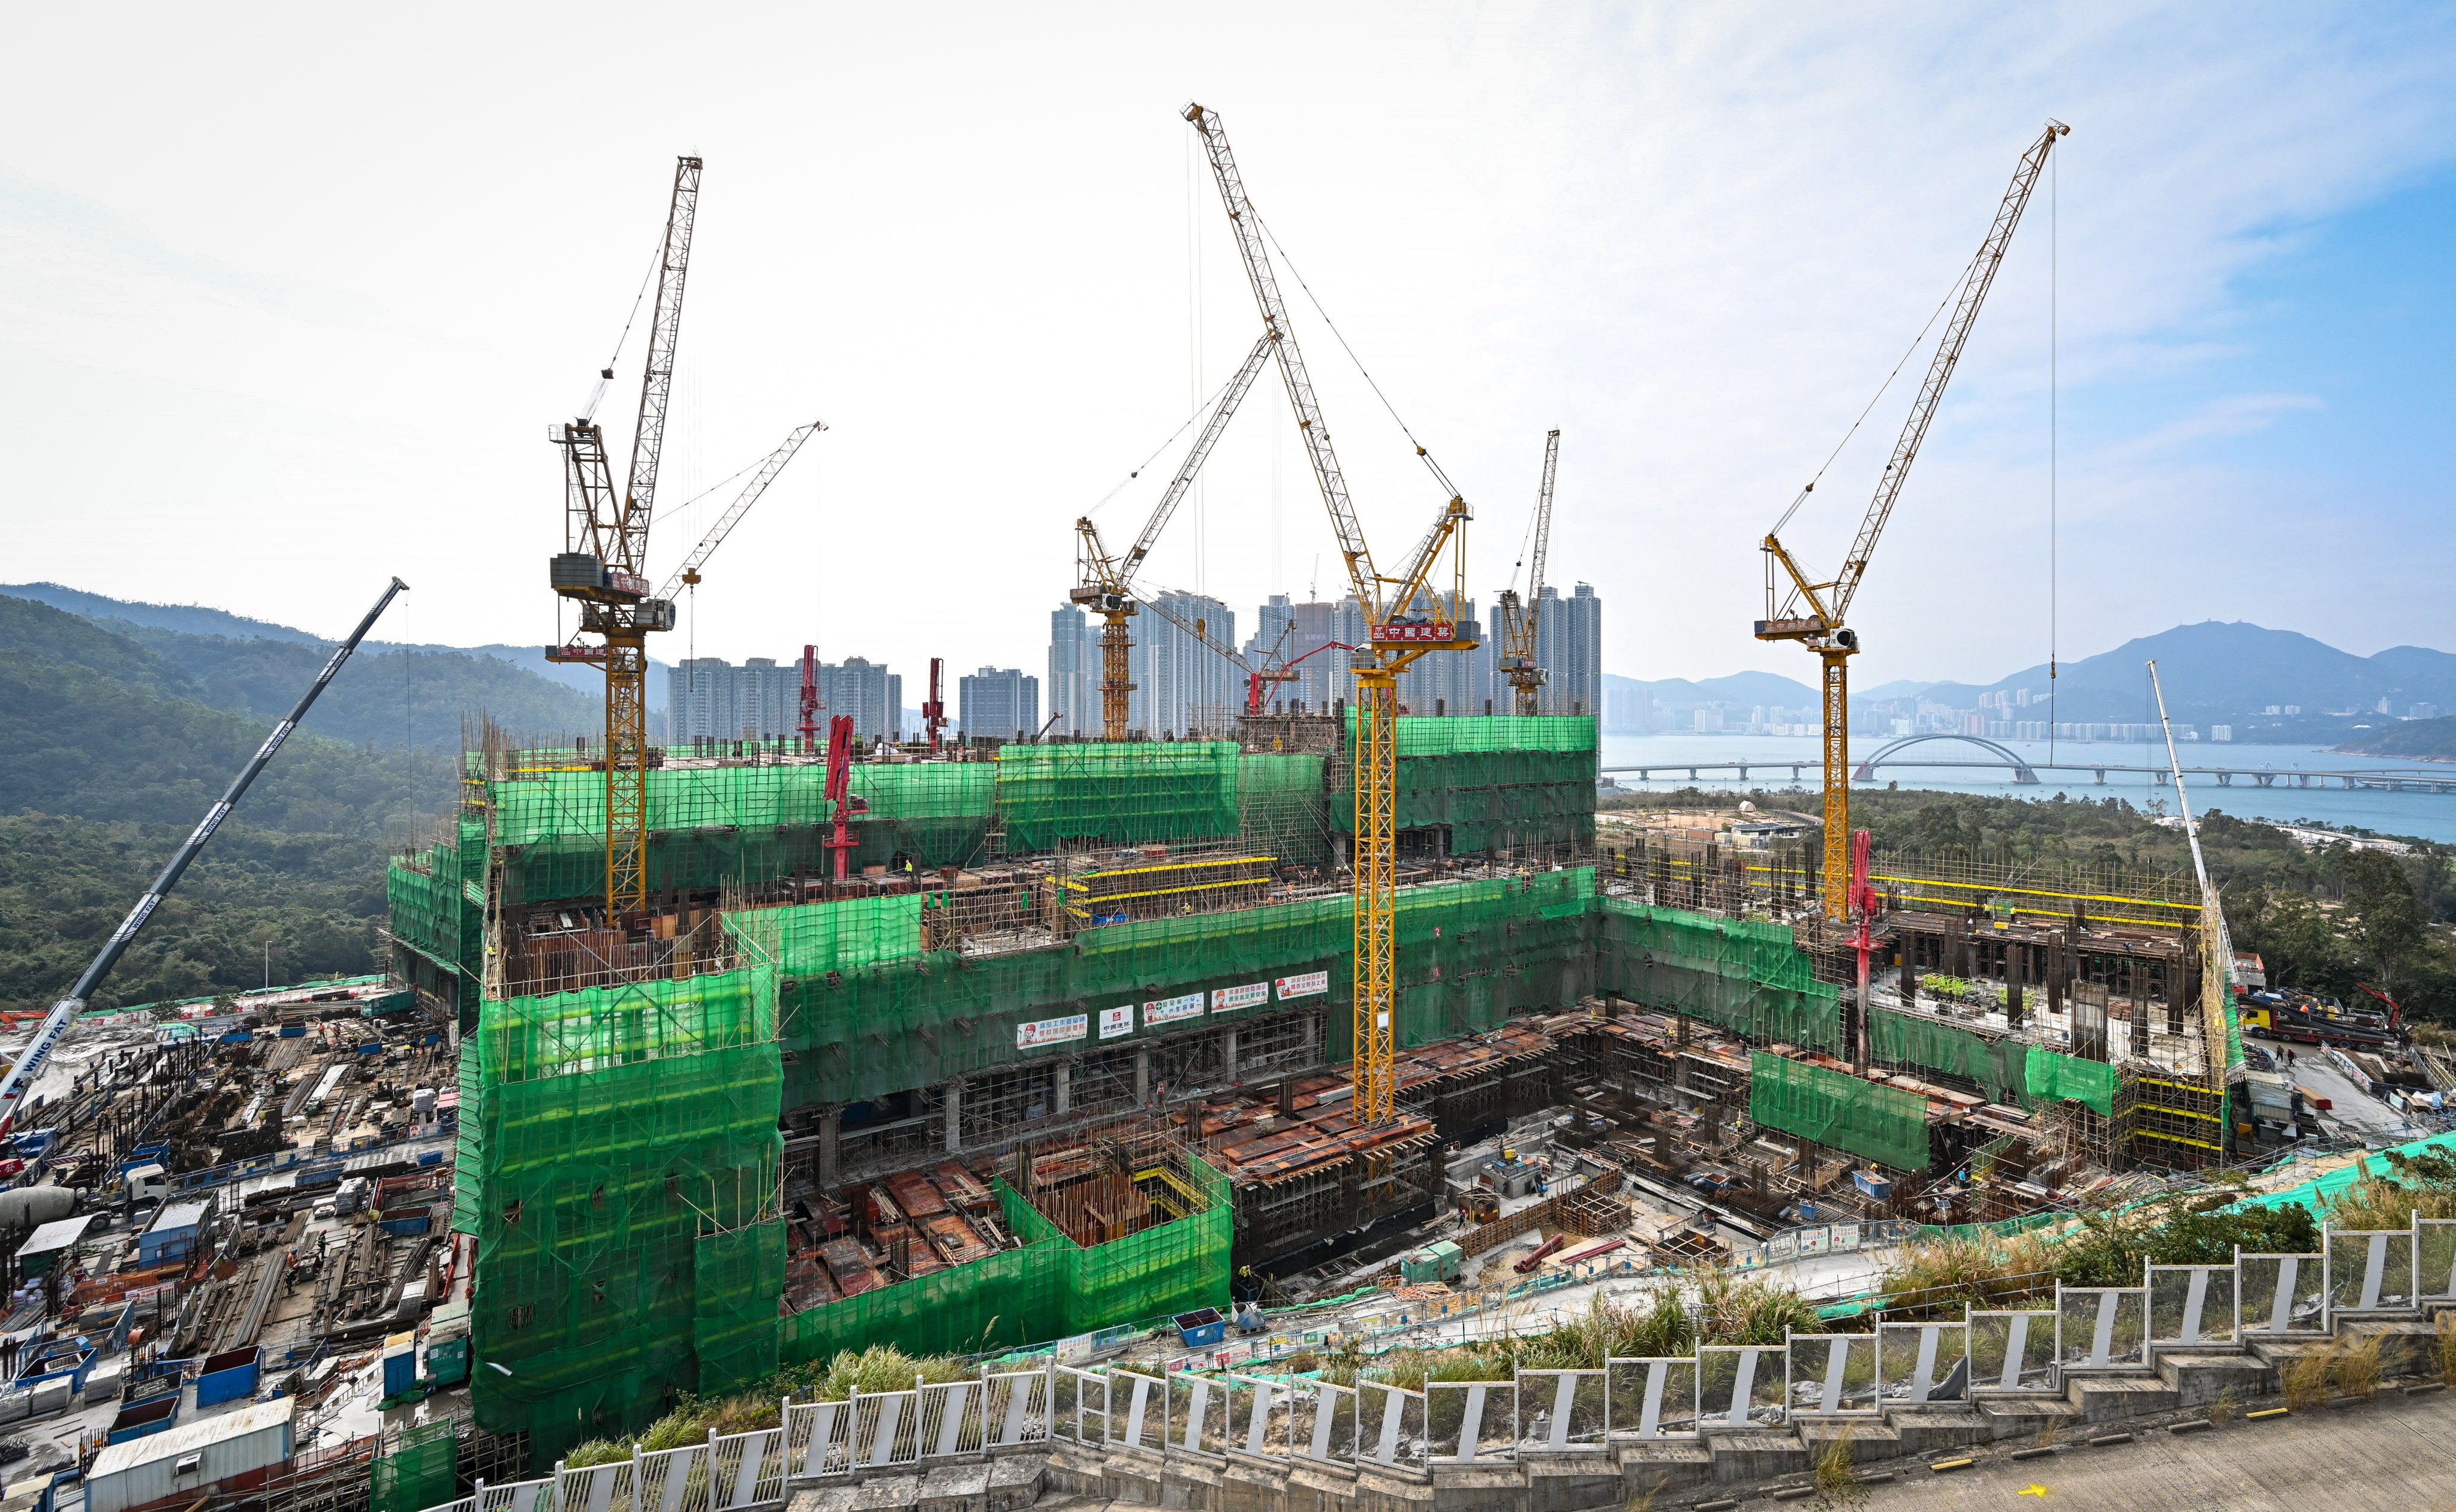 The hospital under construction in Tseung Kwan O. The facility is set to open in late 2025. Photo: SCMP